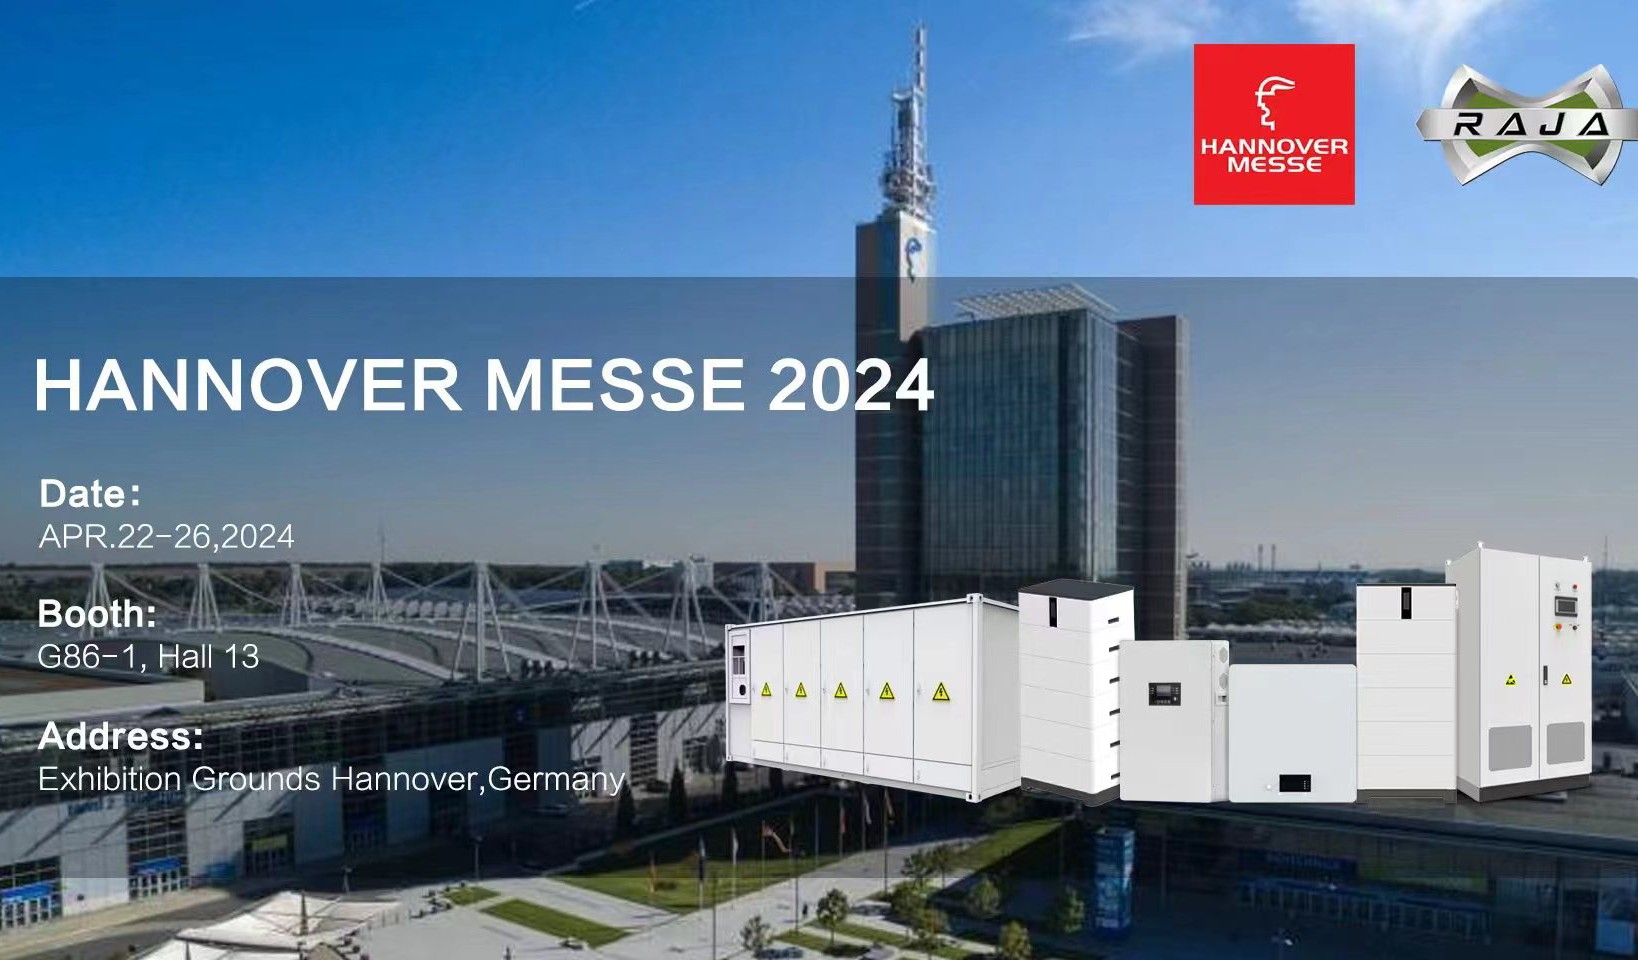 Our Company to Showcase Advanced Balcony solar system and Home Energy Storage Systems at Hannover Messe